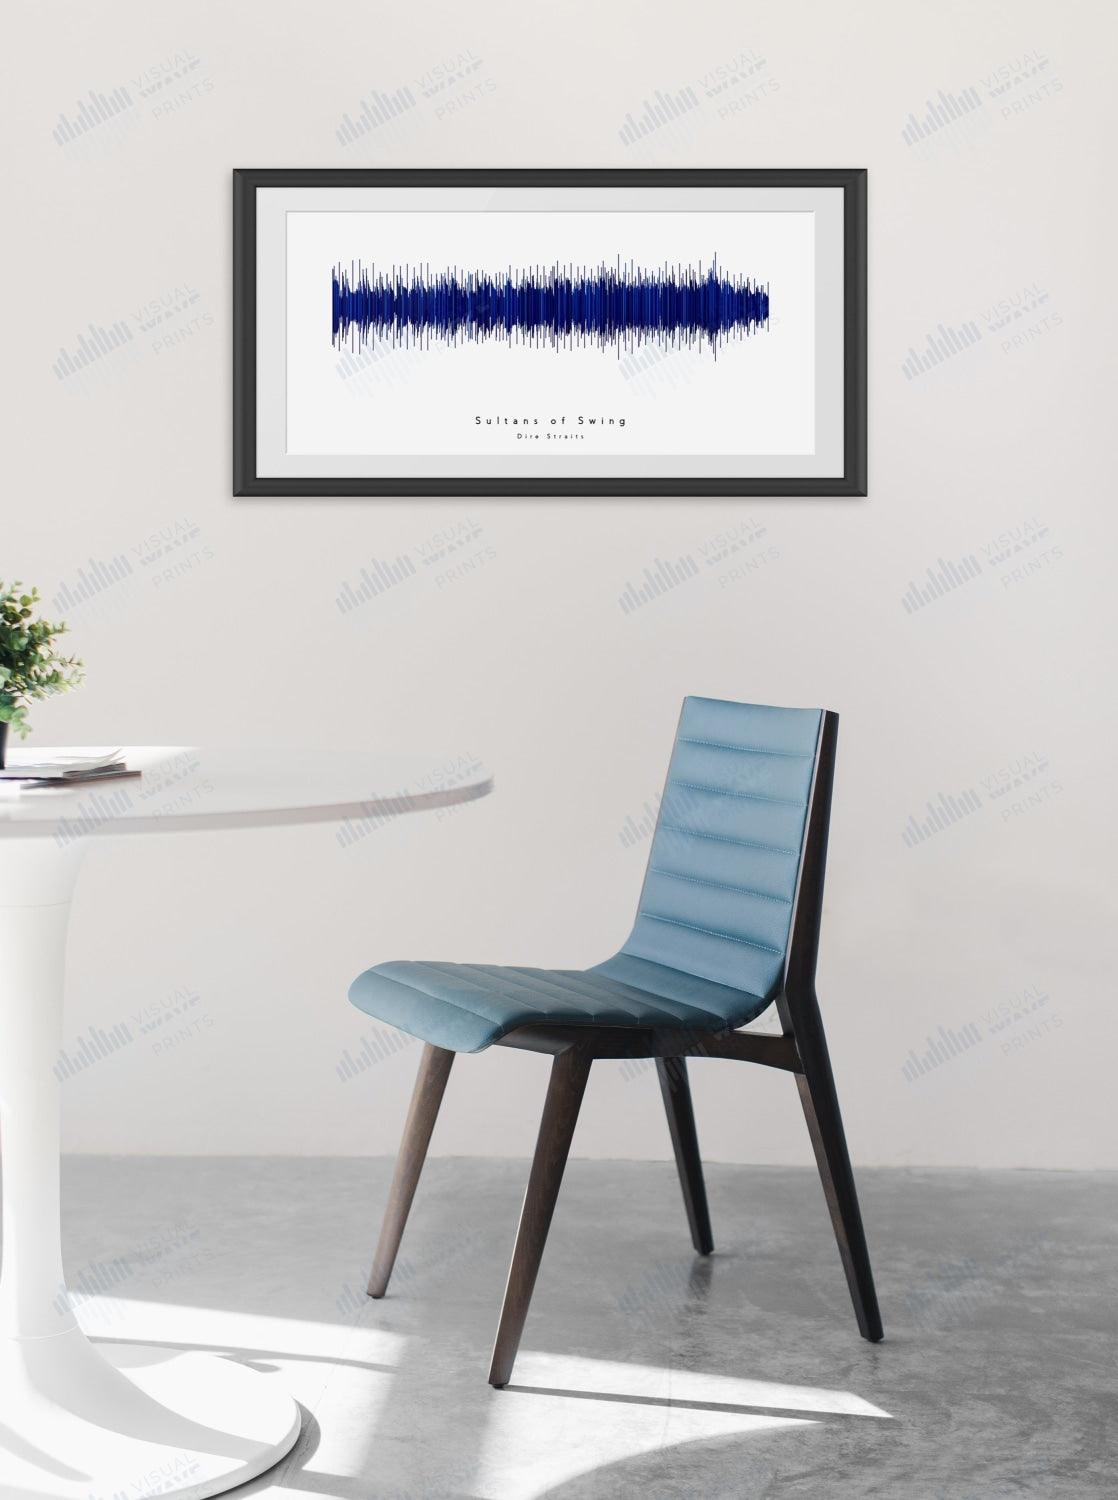 Sultans of Swing by Dire Straits - Visual Wave Prints